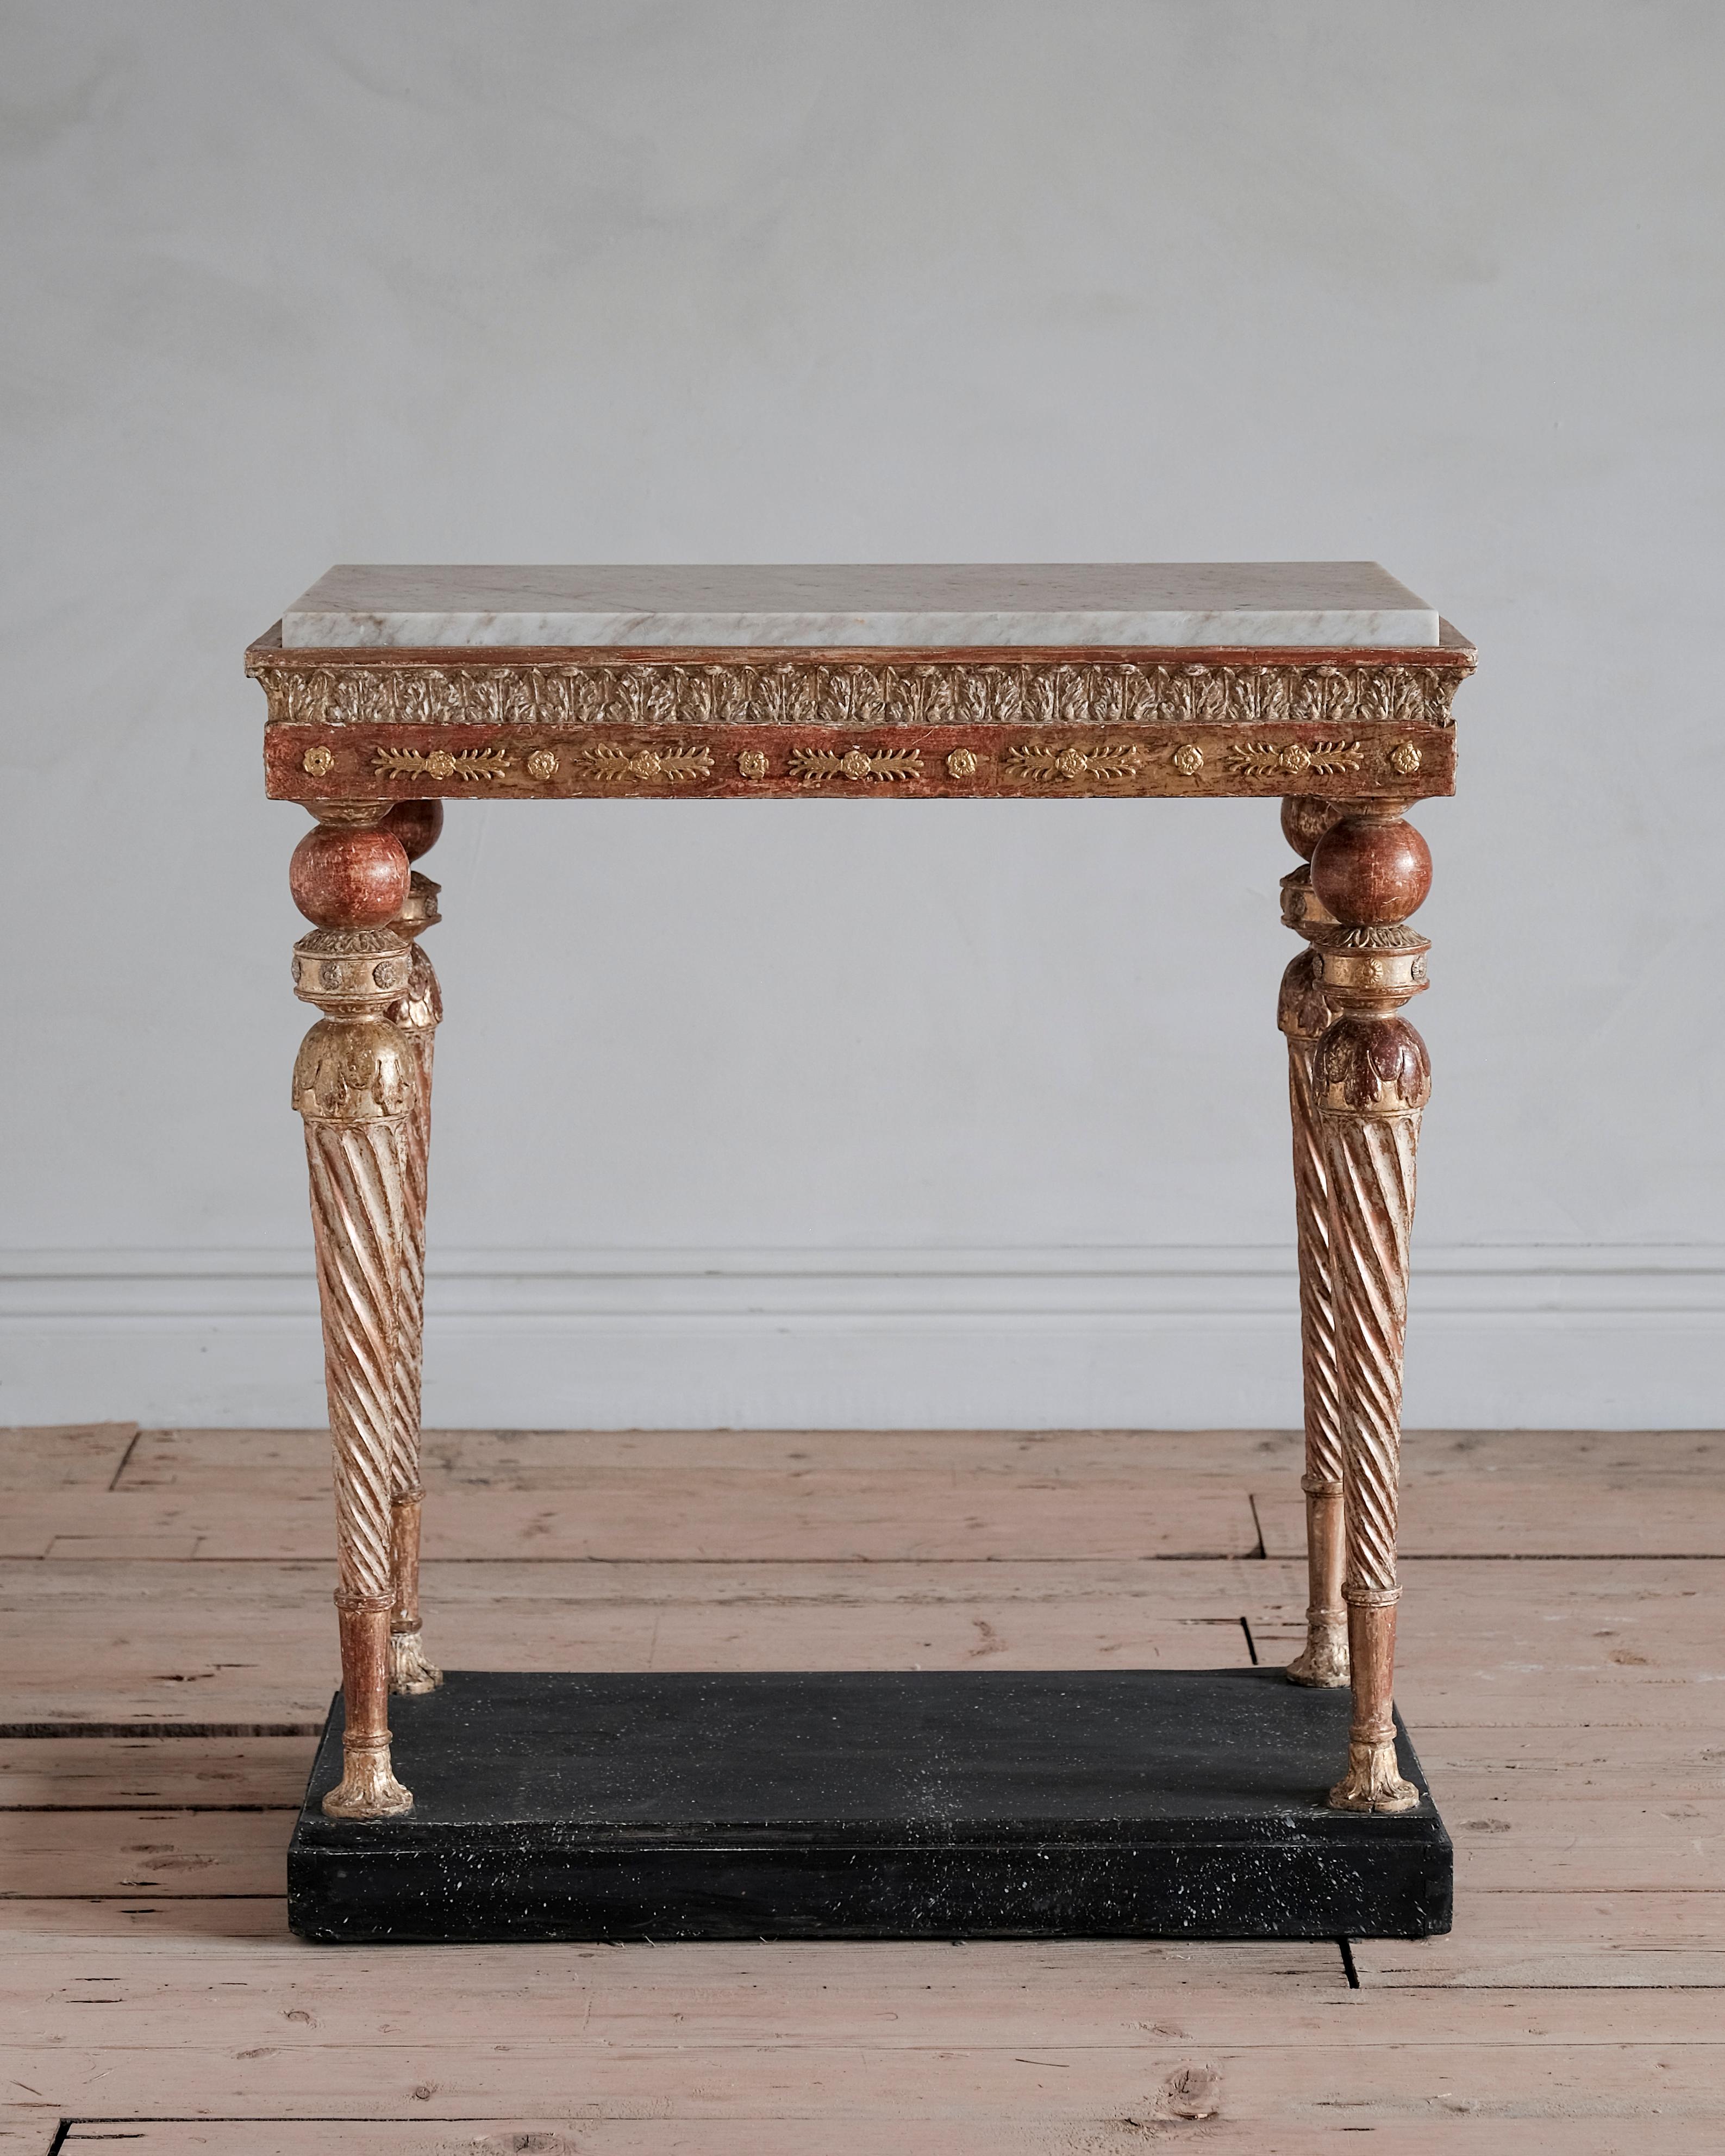 Fine late Gustavian / early Empire giltwood console table with Carrara marble top. Stockholm, circa 1810.